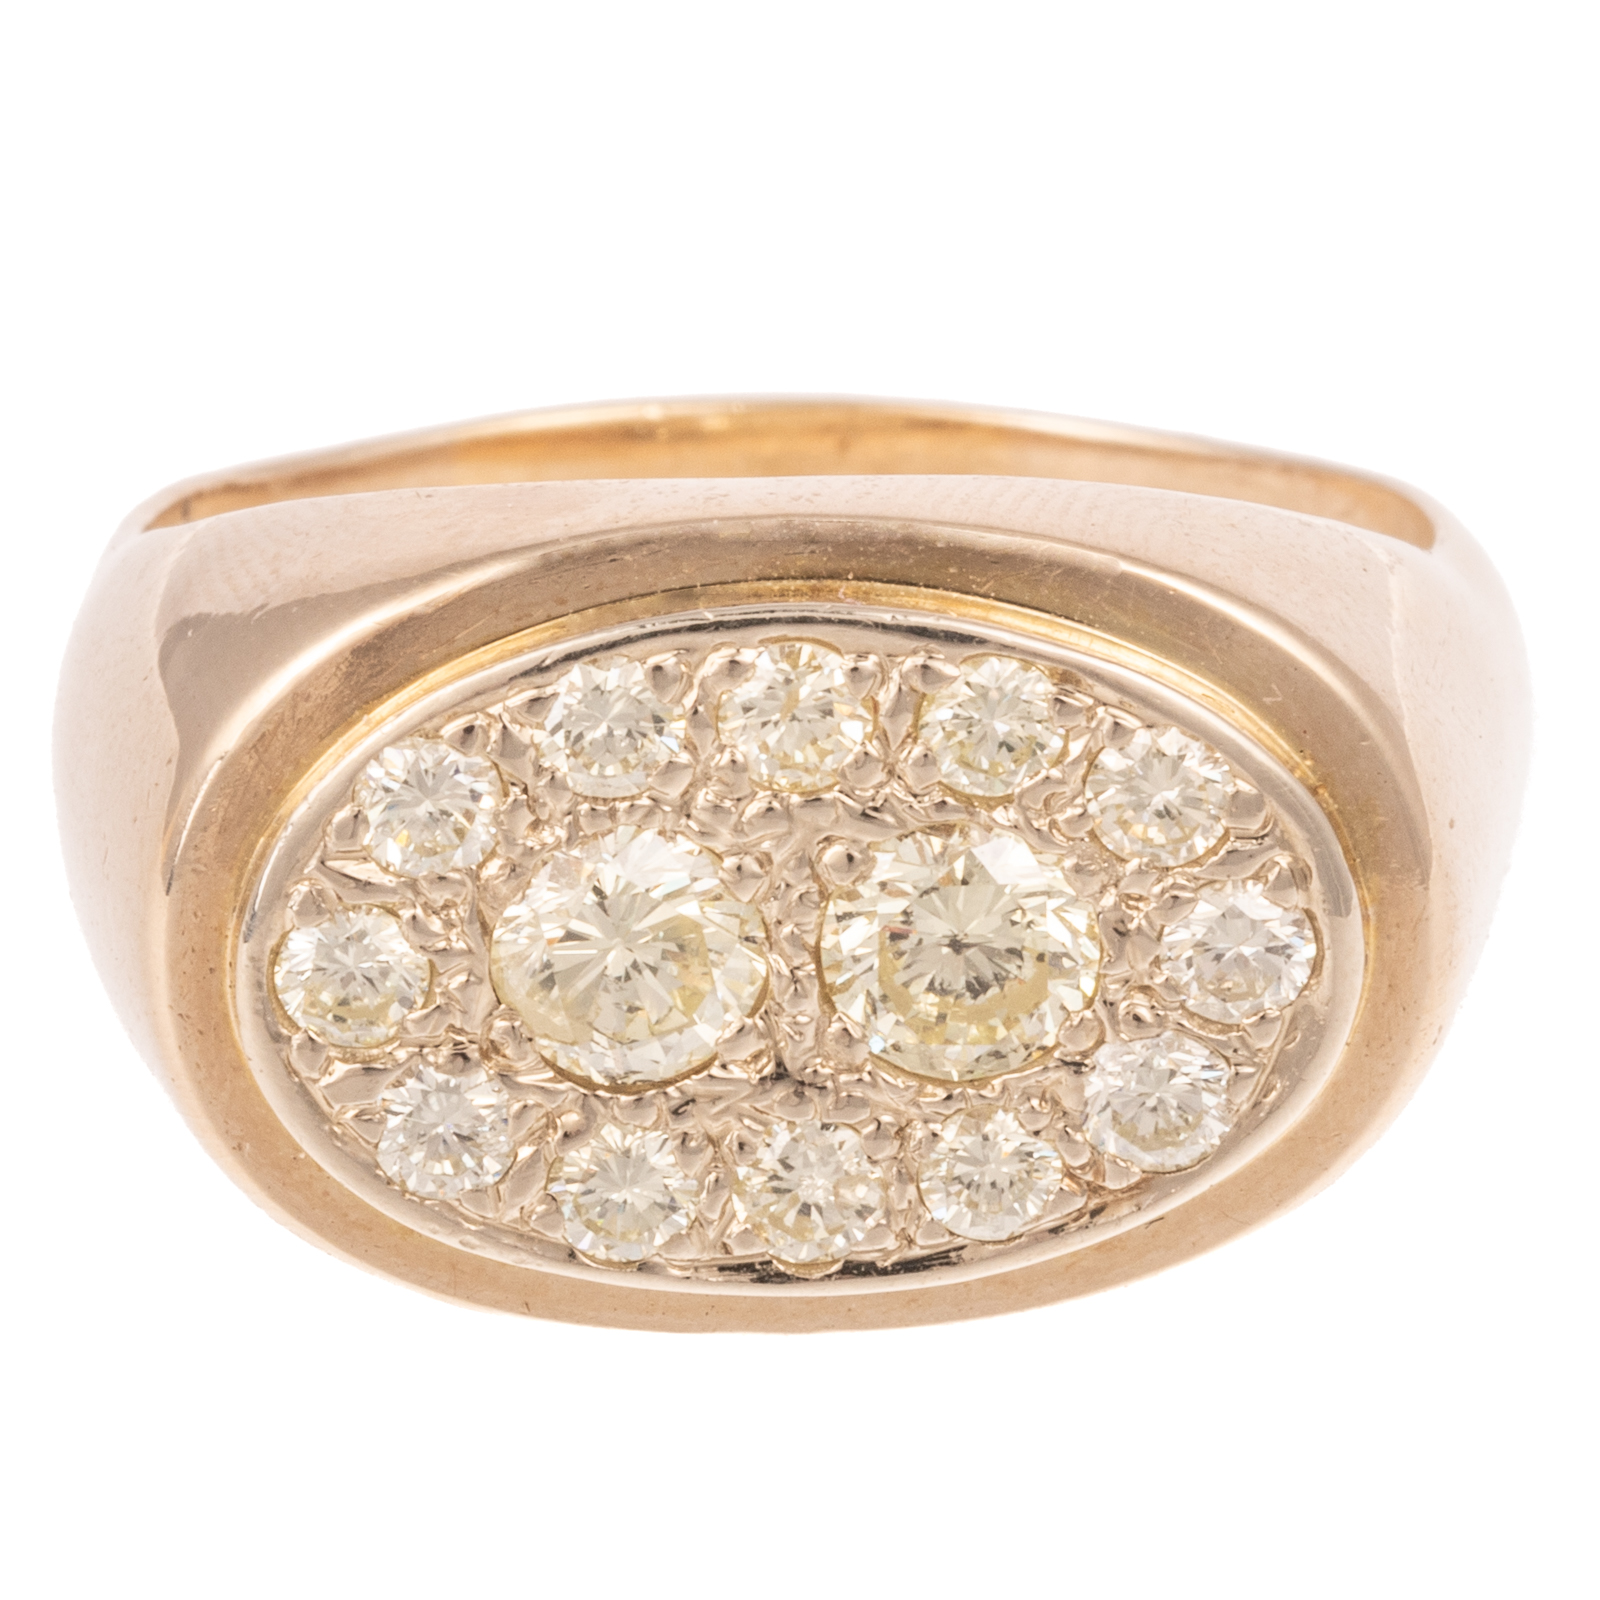 AN OVAL PAVE DIAMOND RING IN 14K 3b2865